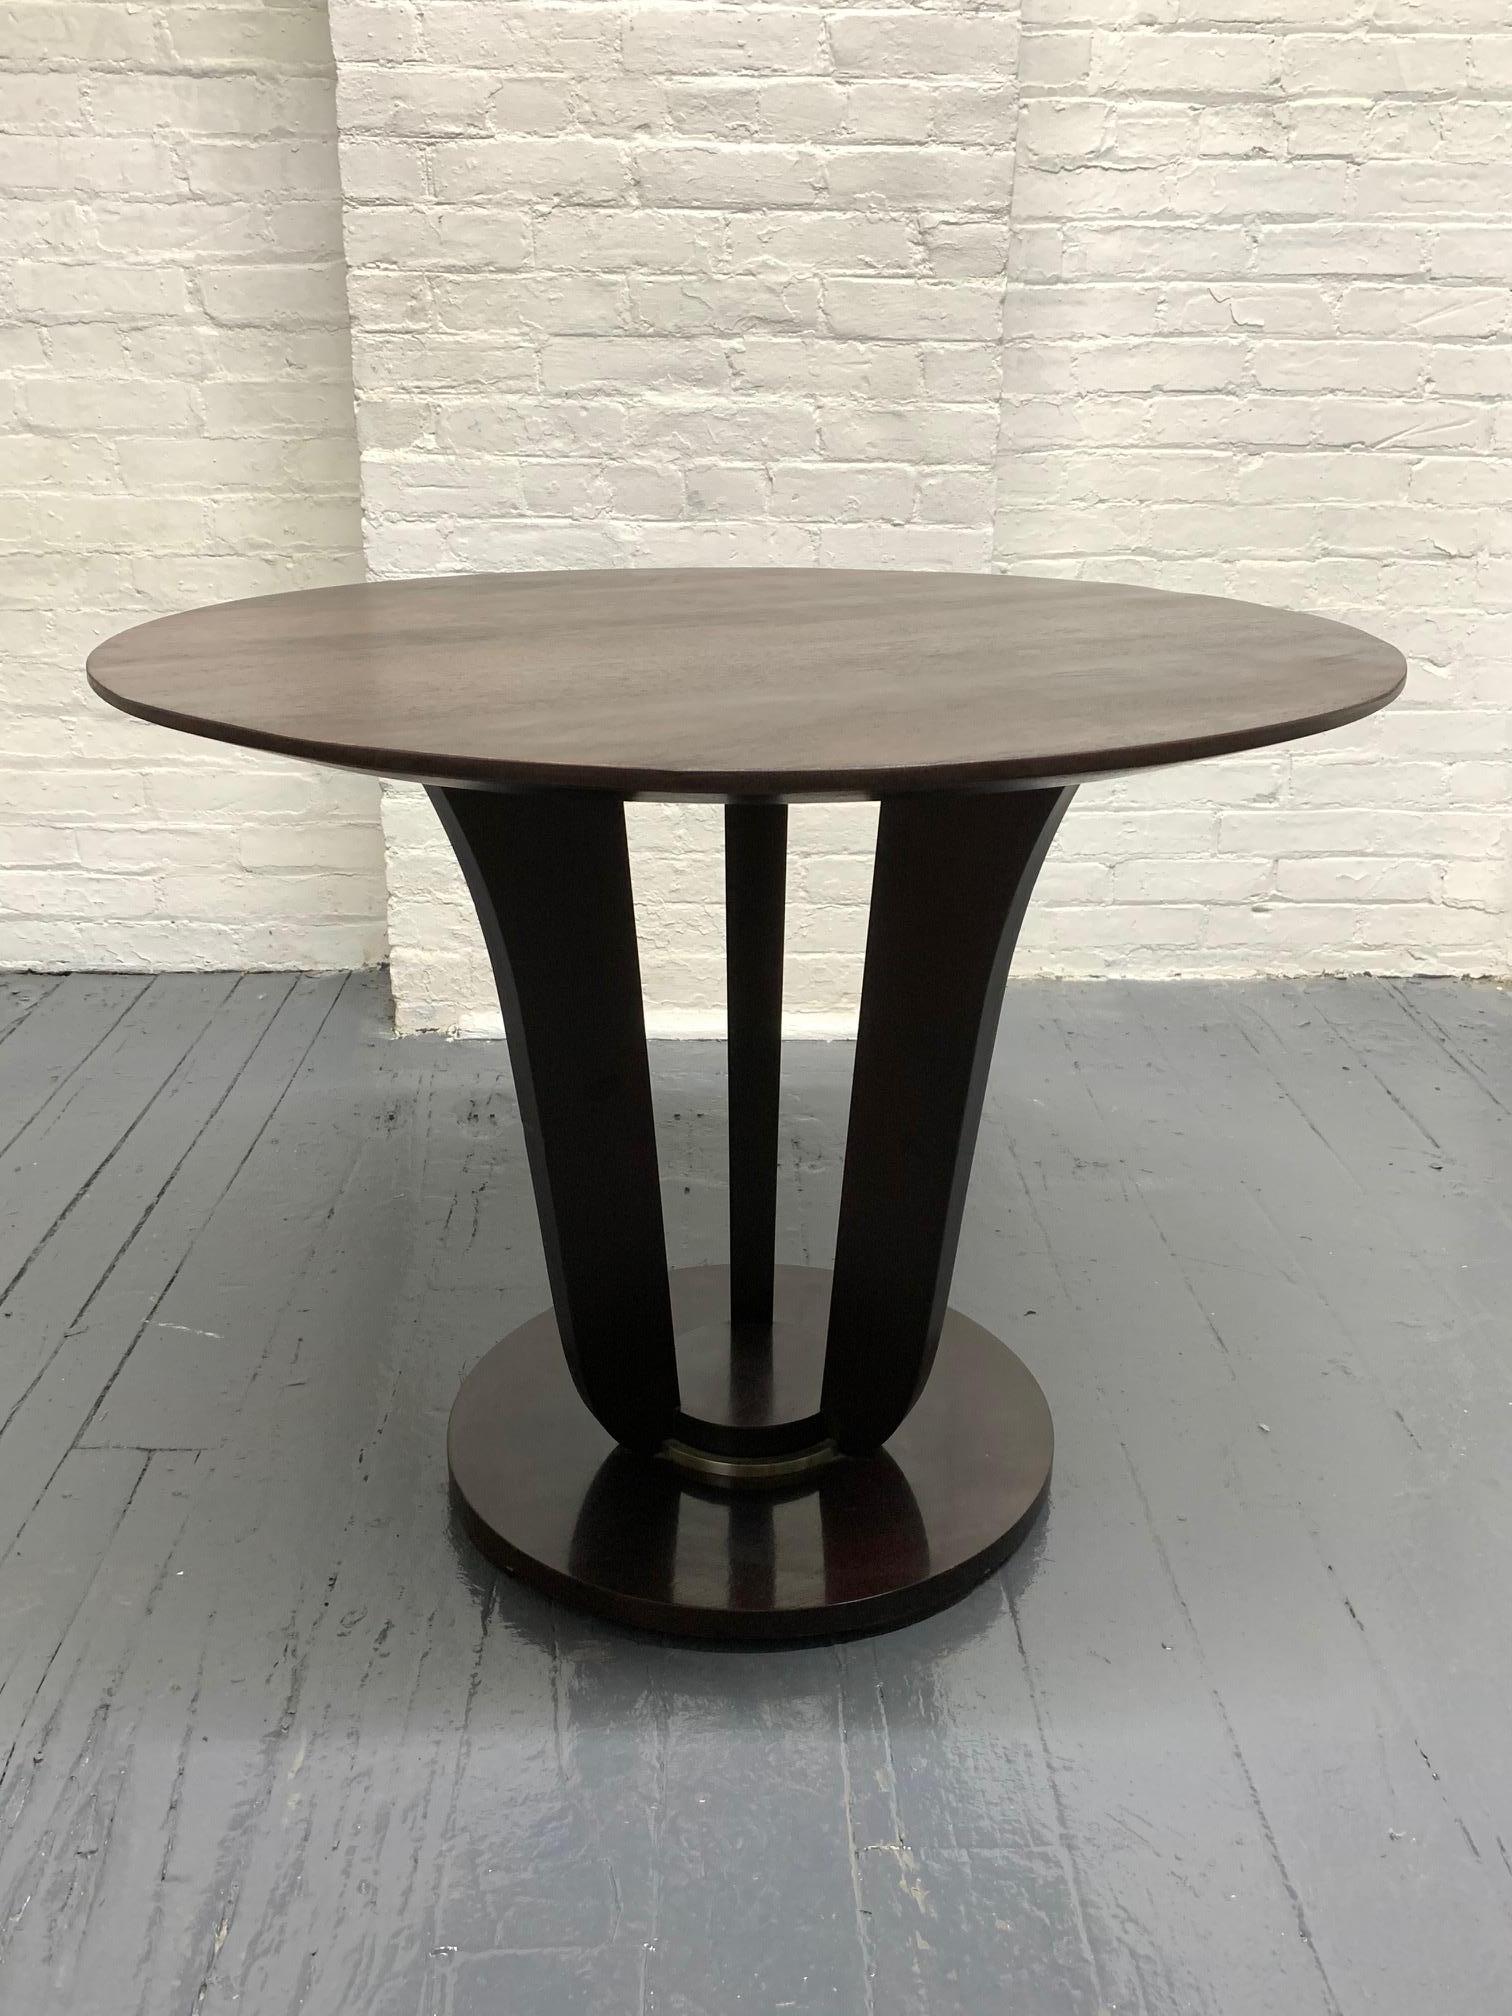 Barbara Barry Gueridon table for Baker. The table is mahogany and has a refinished top. Inspired by LeLeu, a famed French designer of the 1930s, this rich mahogany table has a relaxed finish with nickel detailing at the base. Retains original labels.